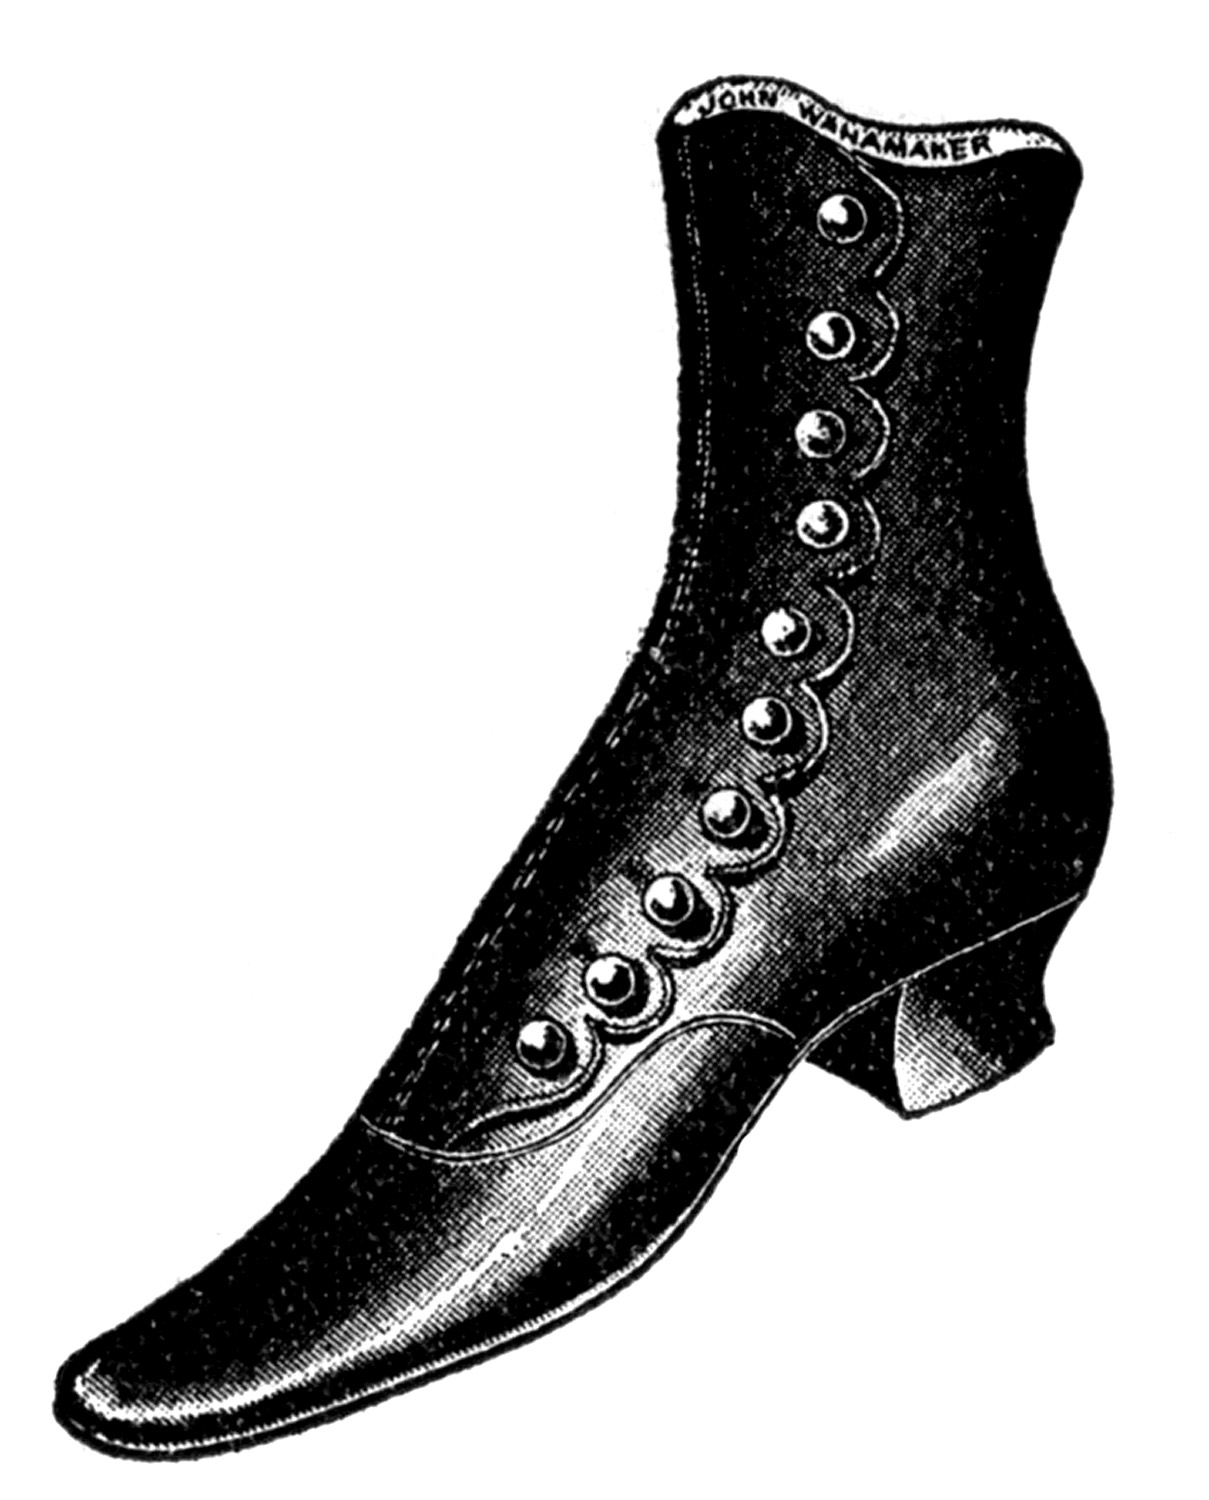 Vintage clip art ladies shoes and boots the graphics fairy